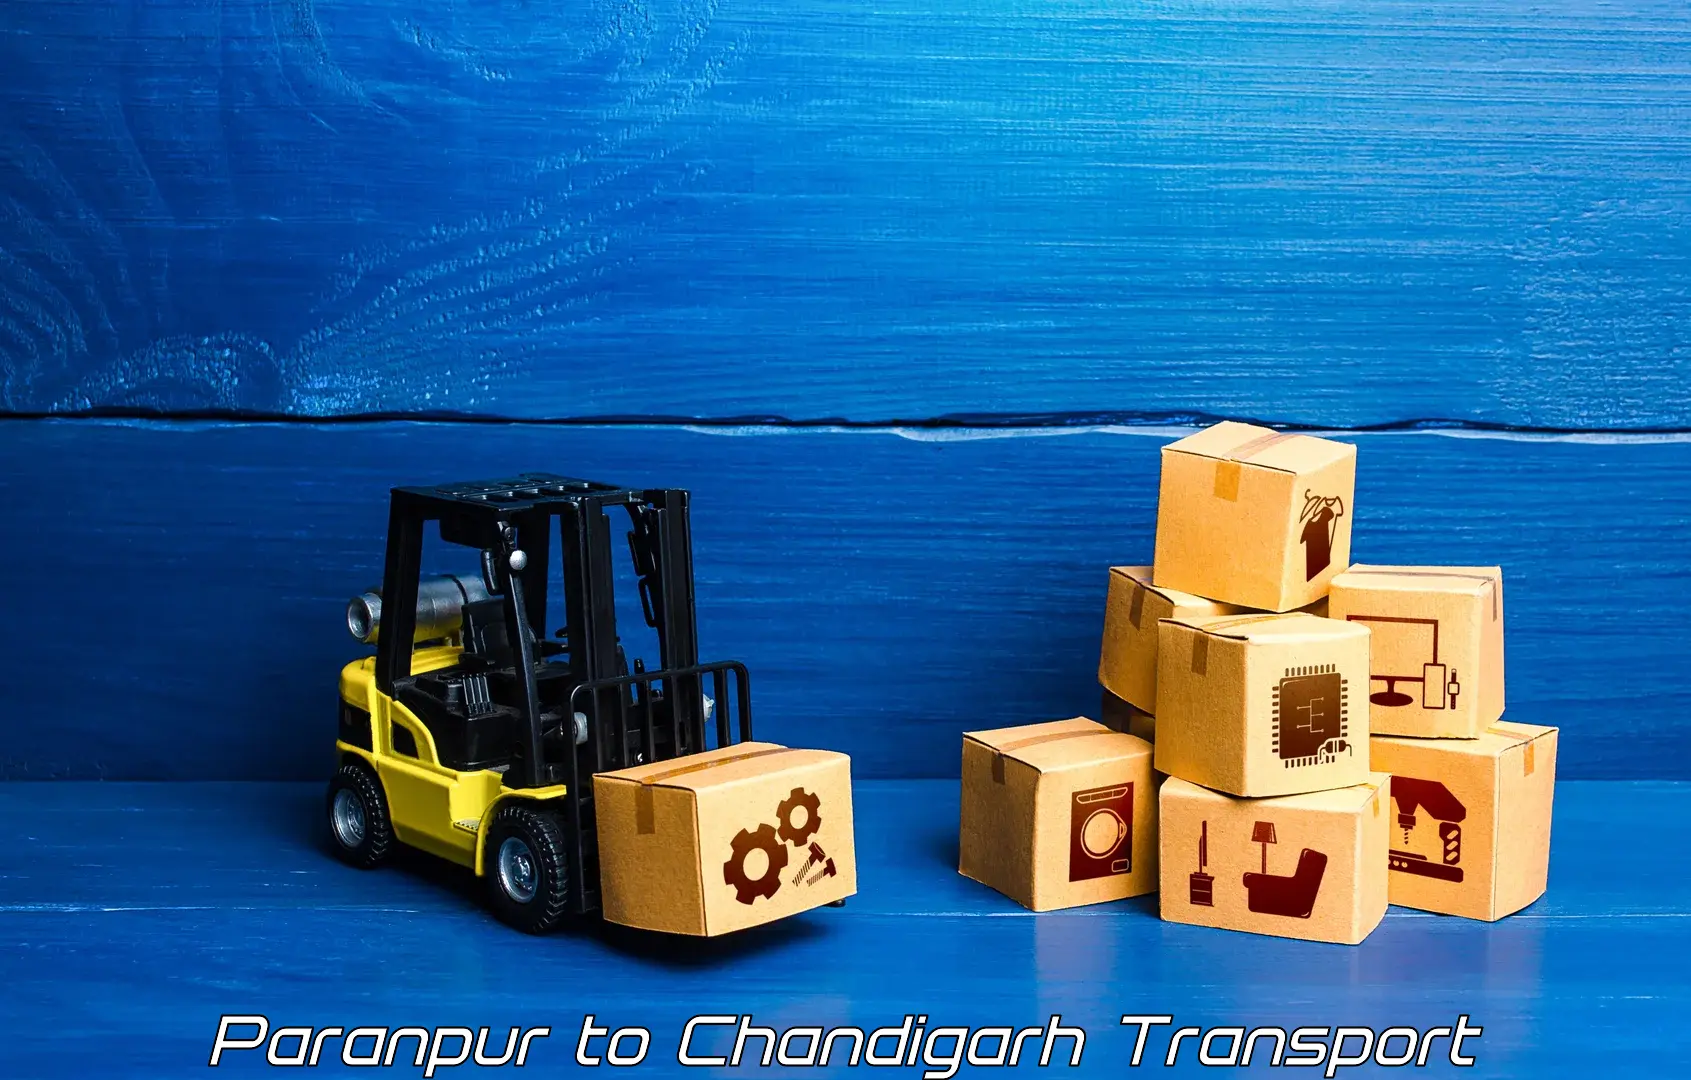 Express transport services Paranpur to Chandigarh